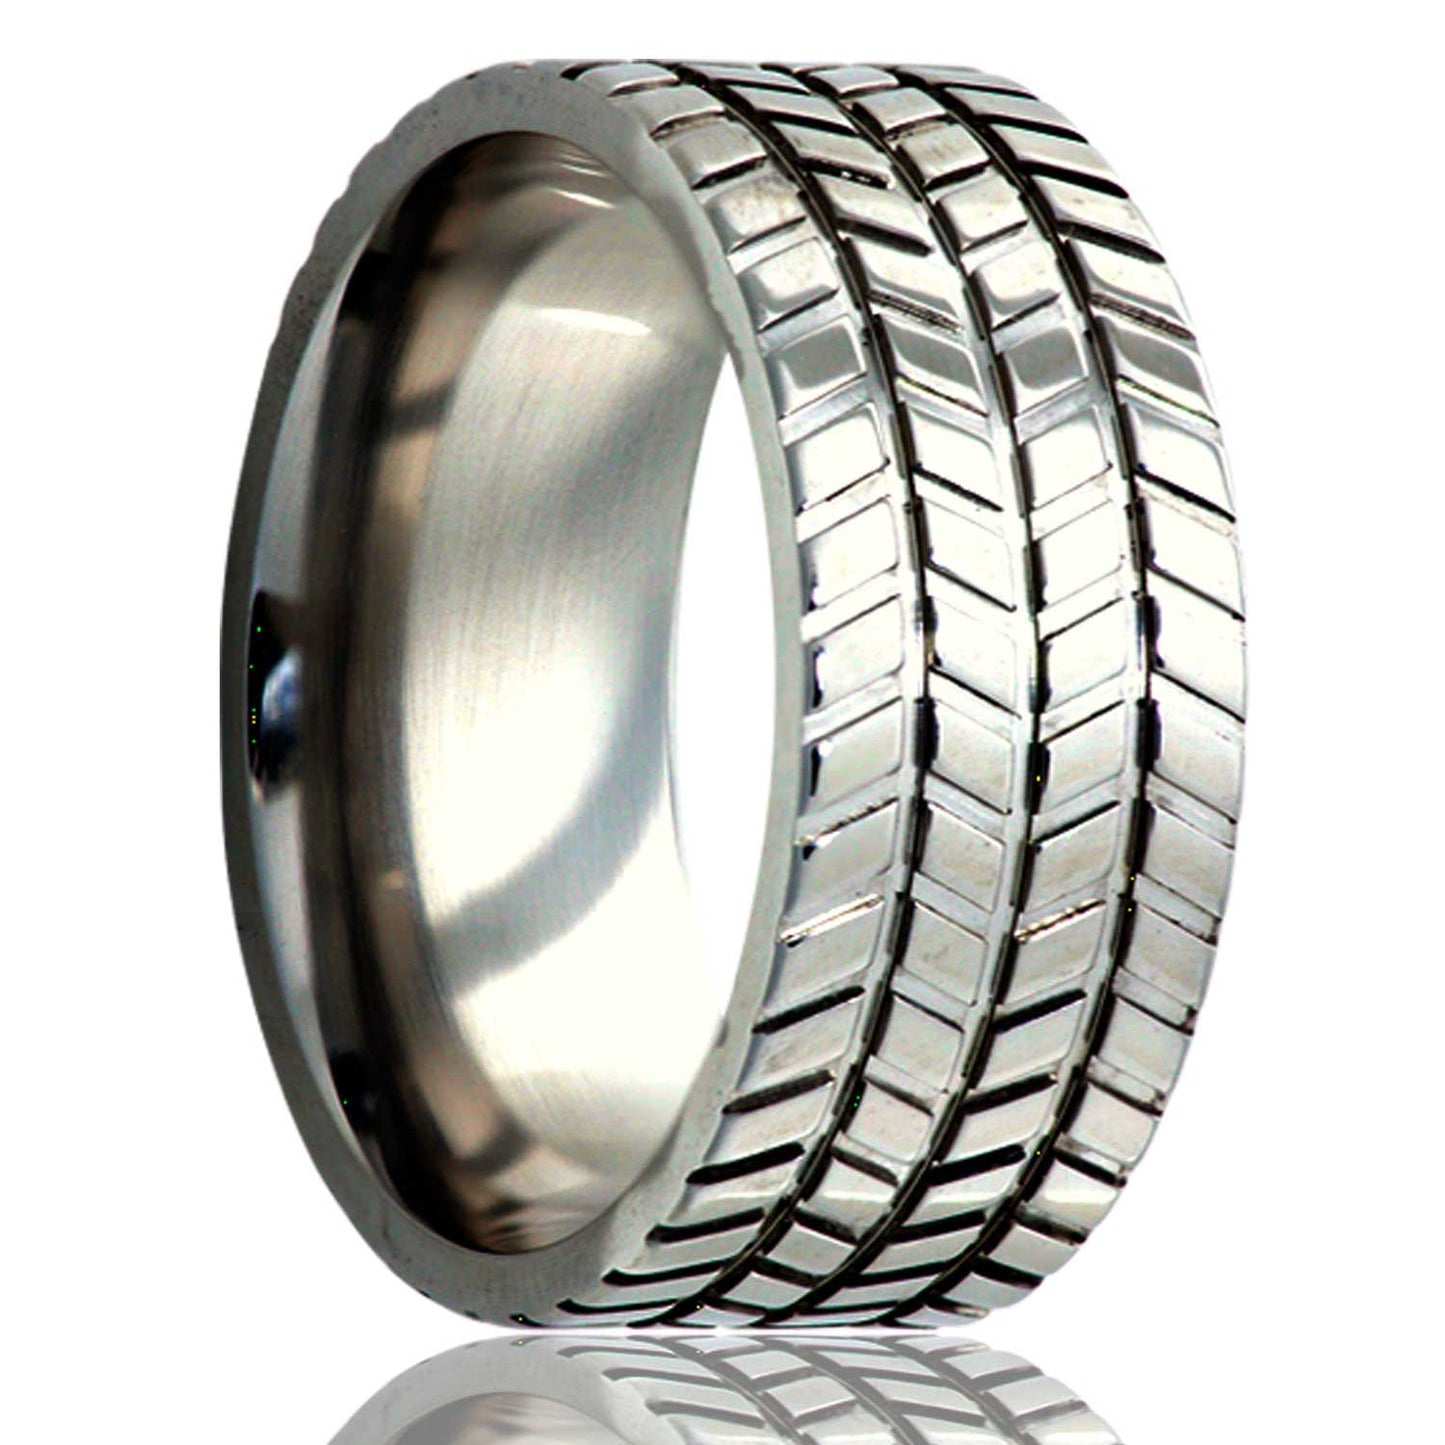 A tire tread titanium men's wedding band displayed on a neutral white background.